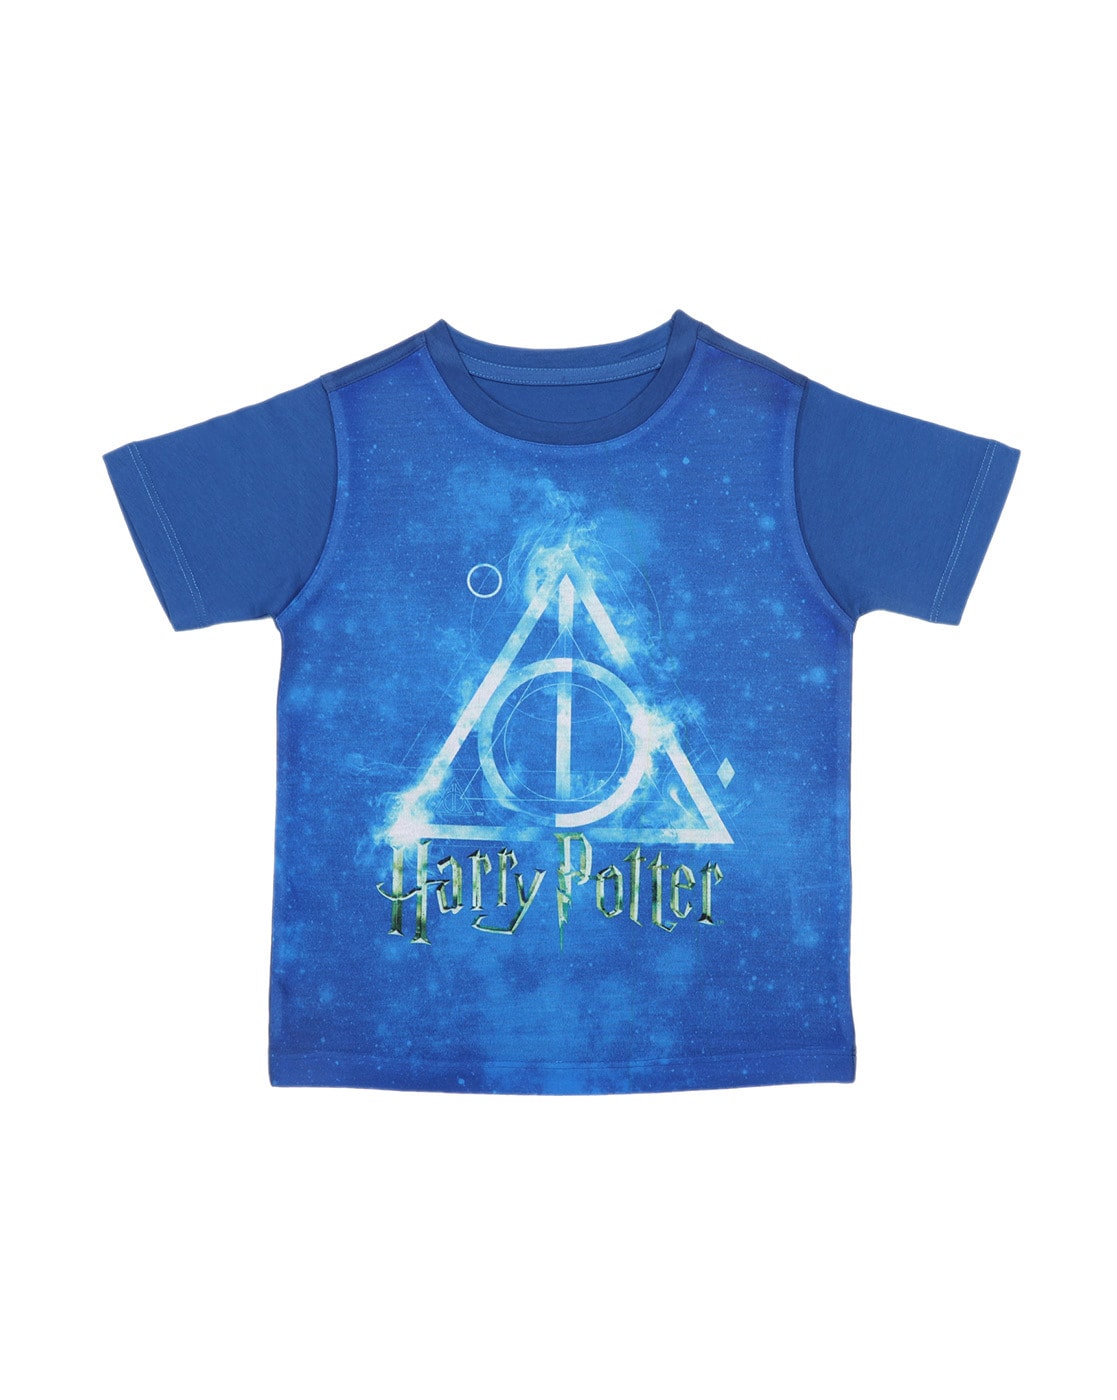 Buy Blue Tshirts for Boys Harry Potter Online |